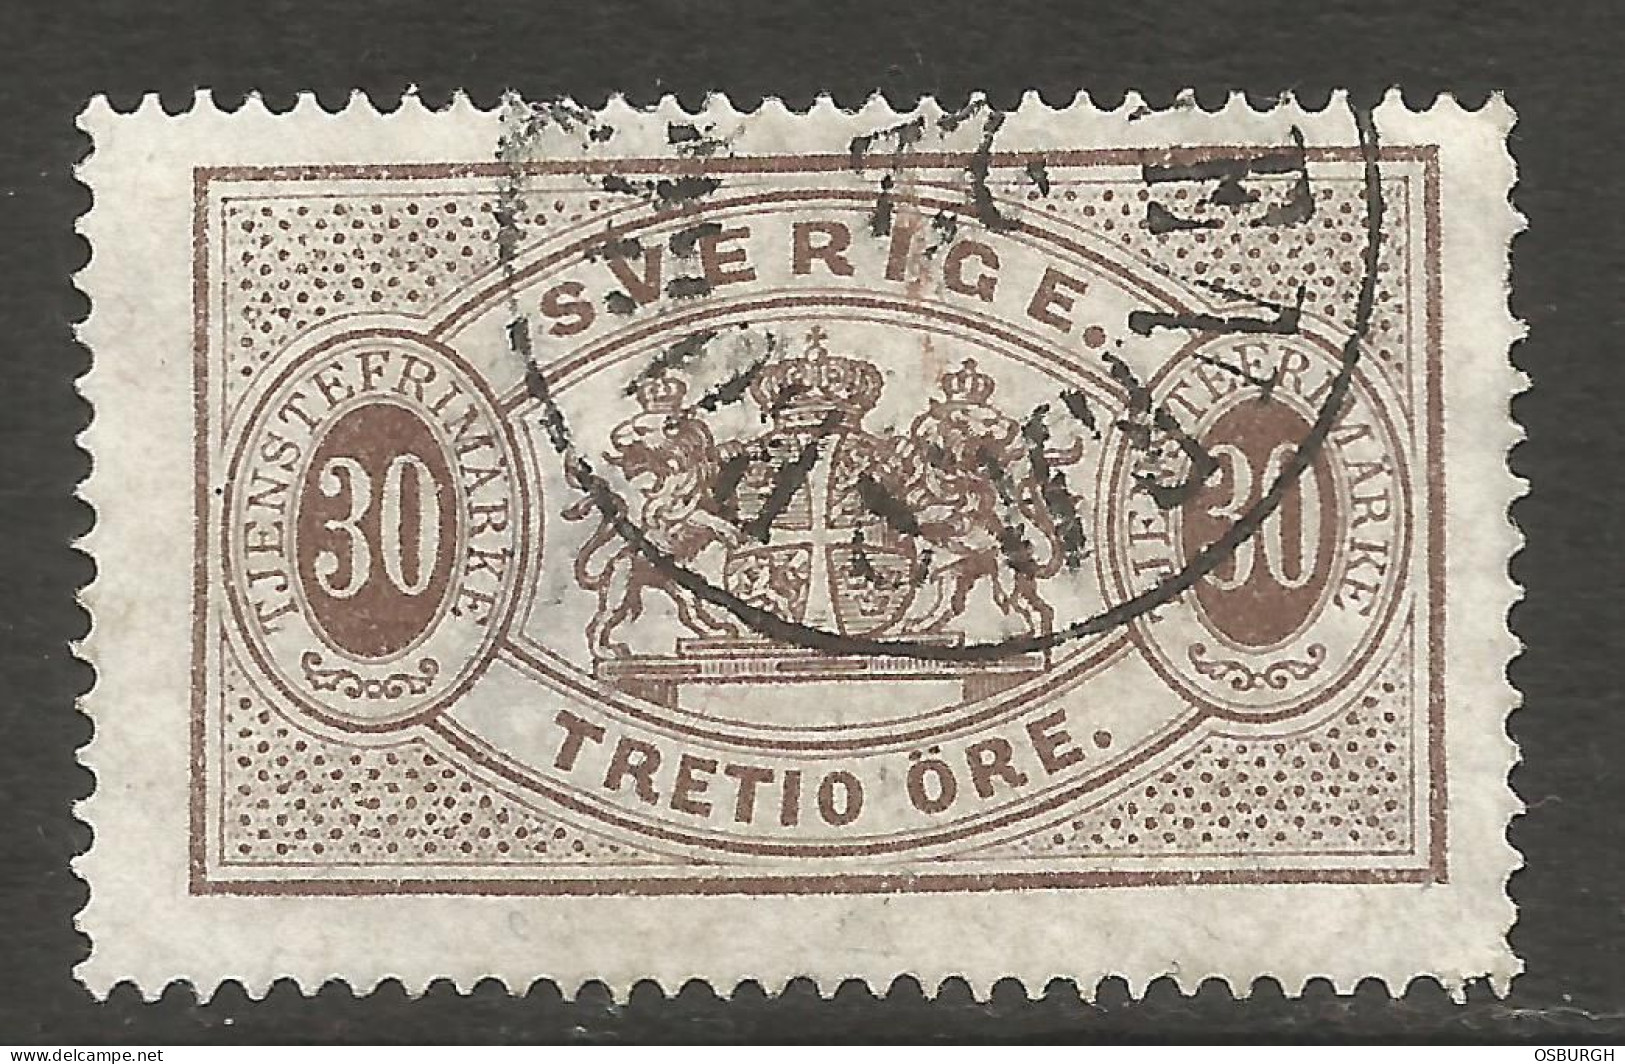 SWEDEN. OFFICIAL. 30o USED ENERSBORG  POSTMARK. - Oficiales